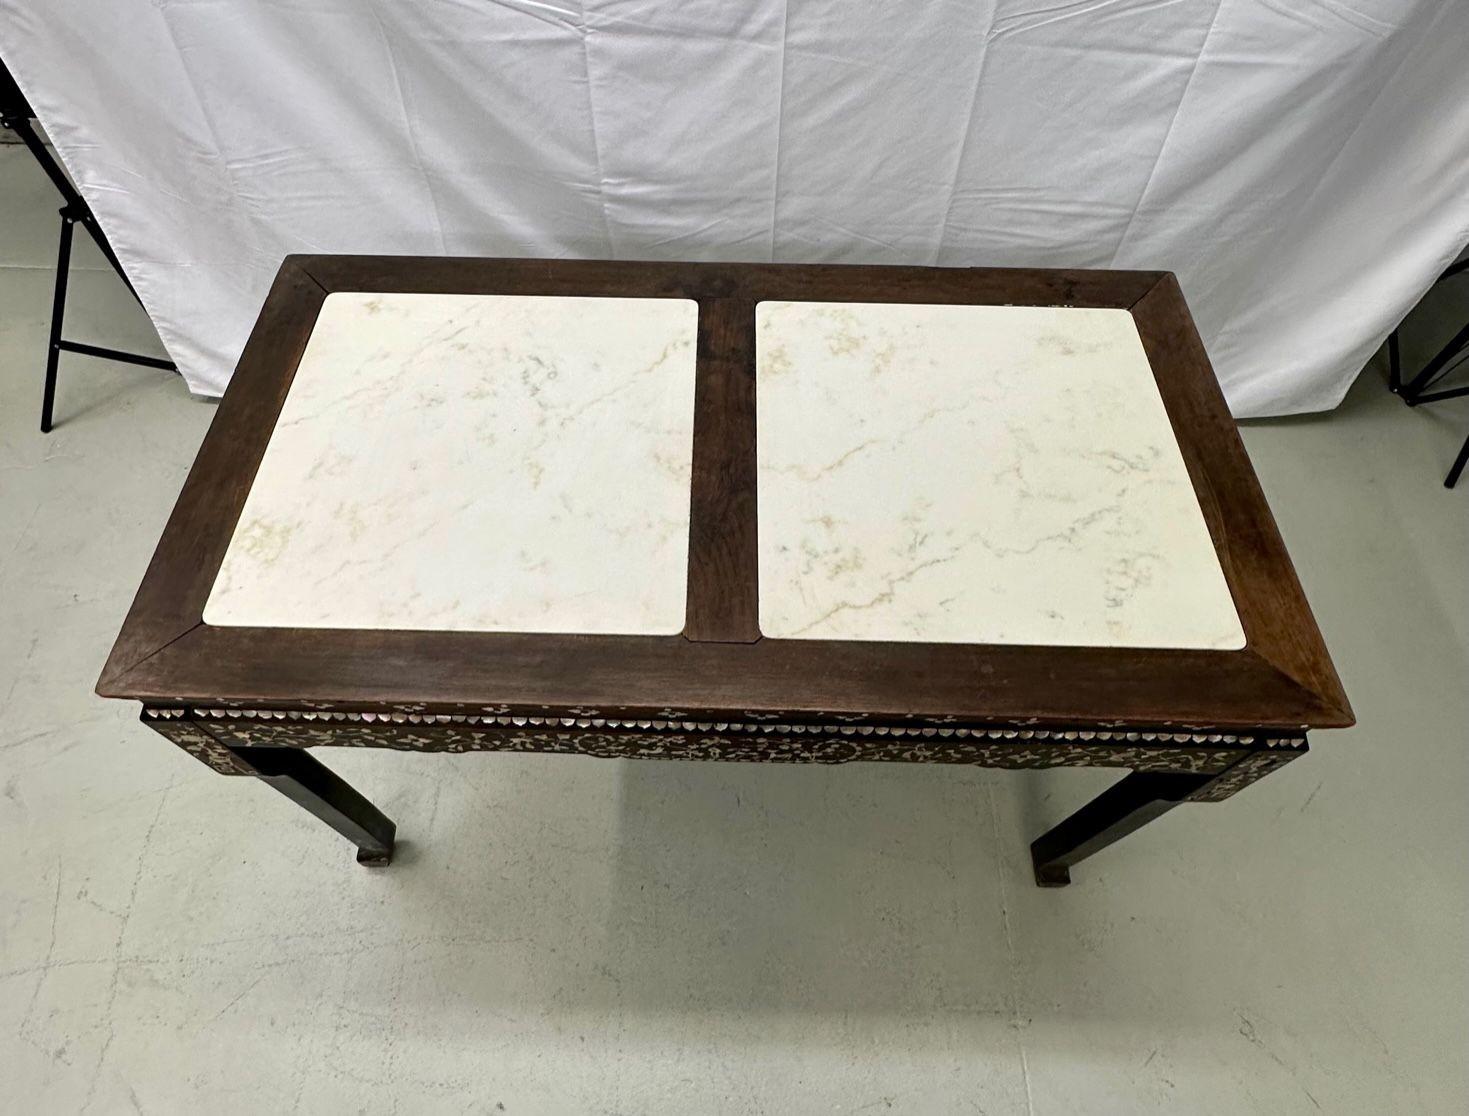 Syrian Rosewood and Mother of Pearl Inlay Console Table with Marble Top
The fine table top having a thick marble top in two pieces supported by a fine mother of pearl inlay apron on long sleek legs. The apron design very bobo chic with birds,